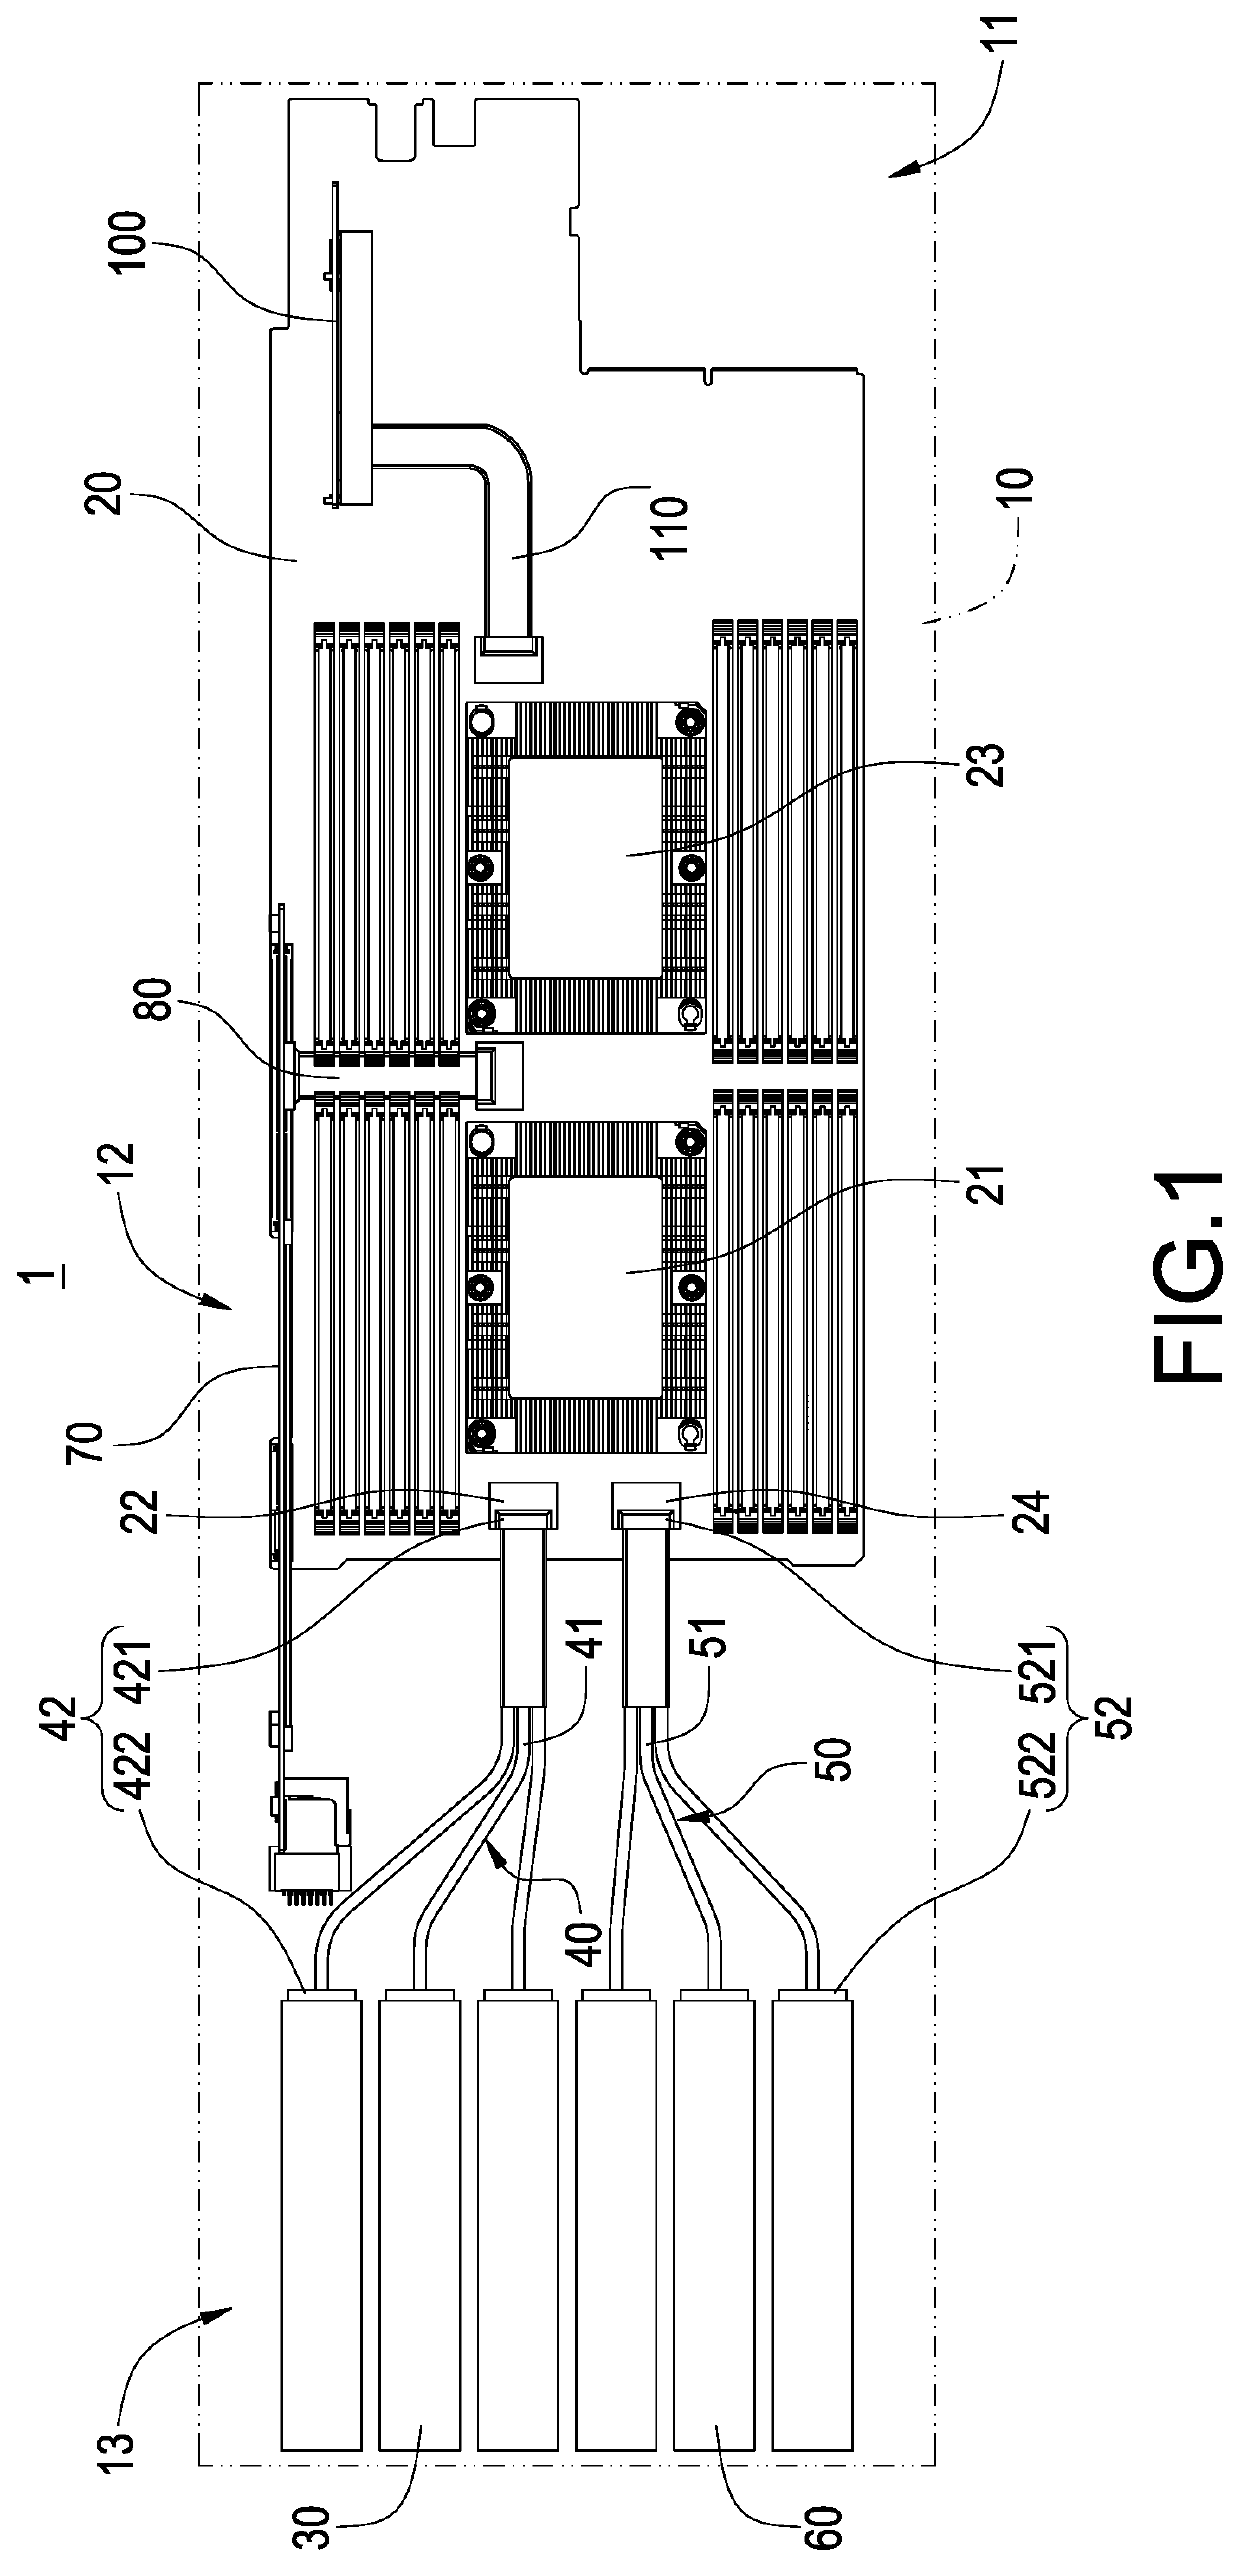 Chassis internal connection structure for server